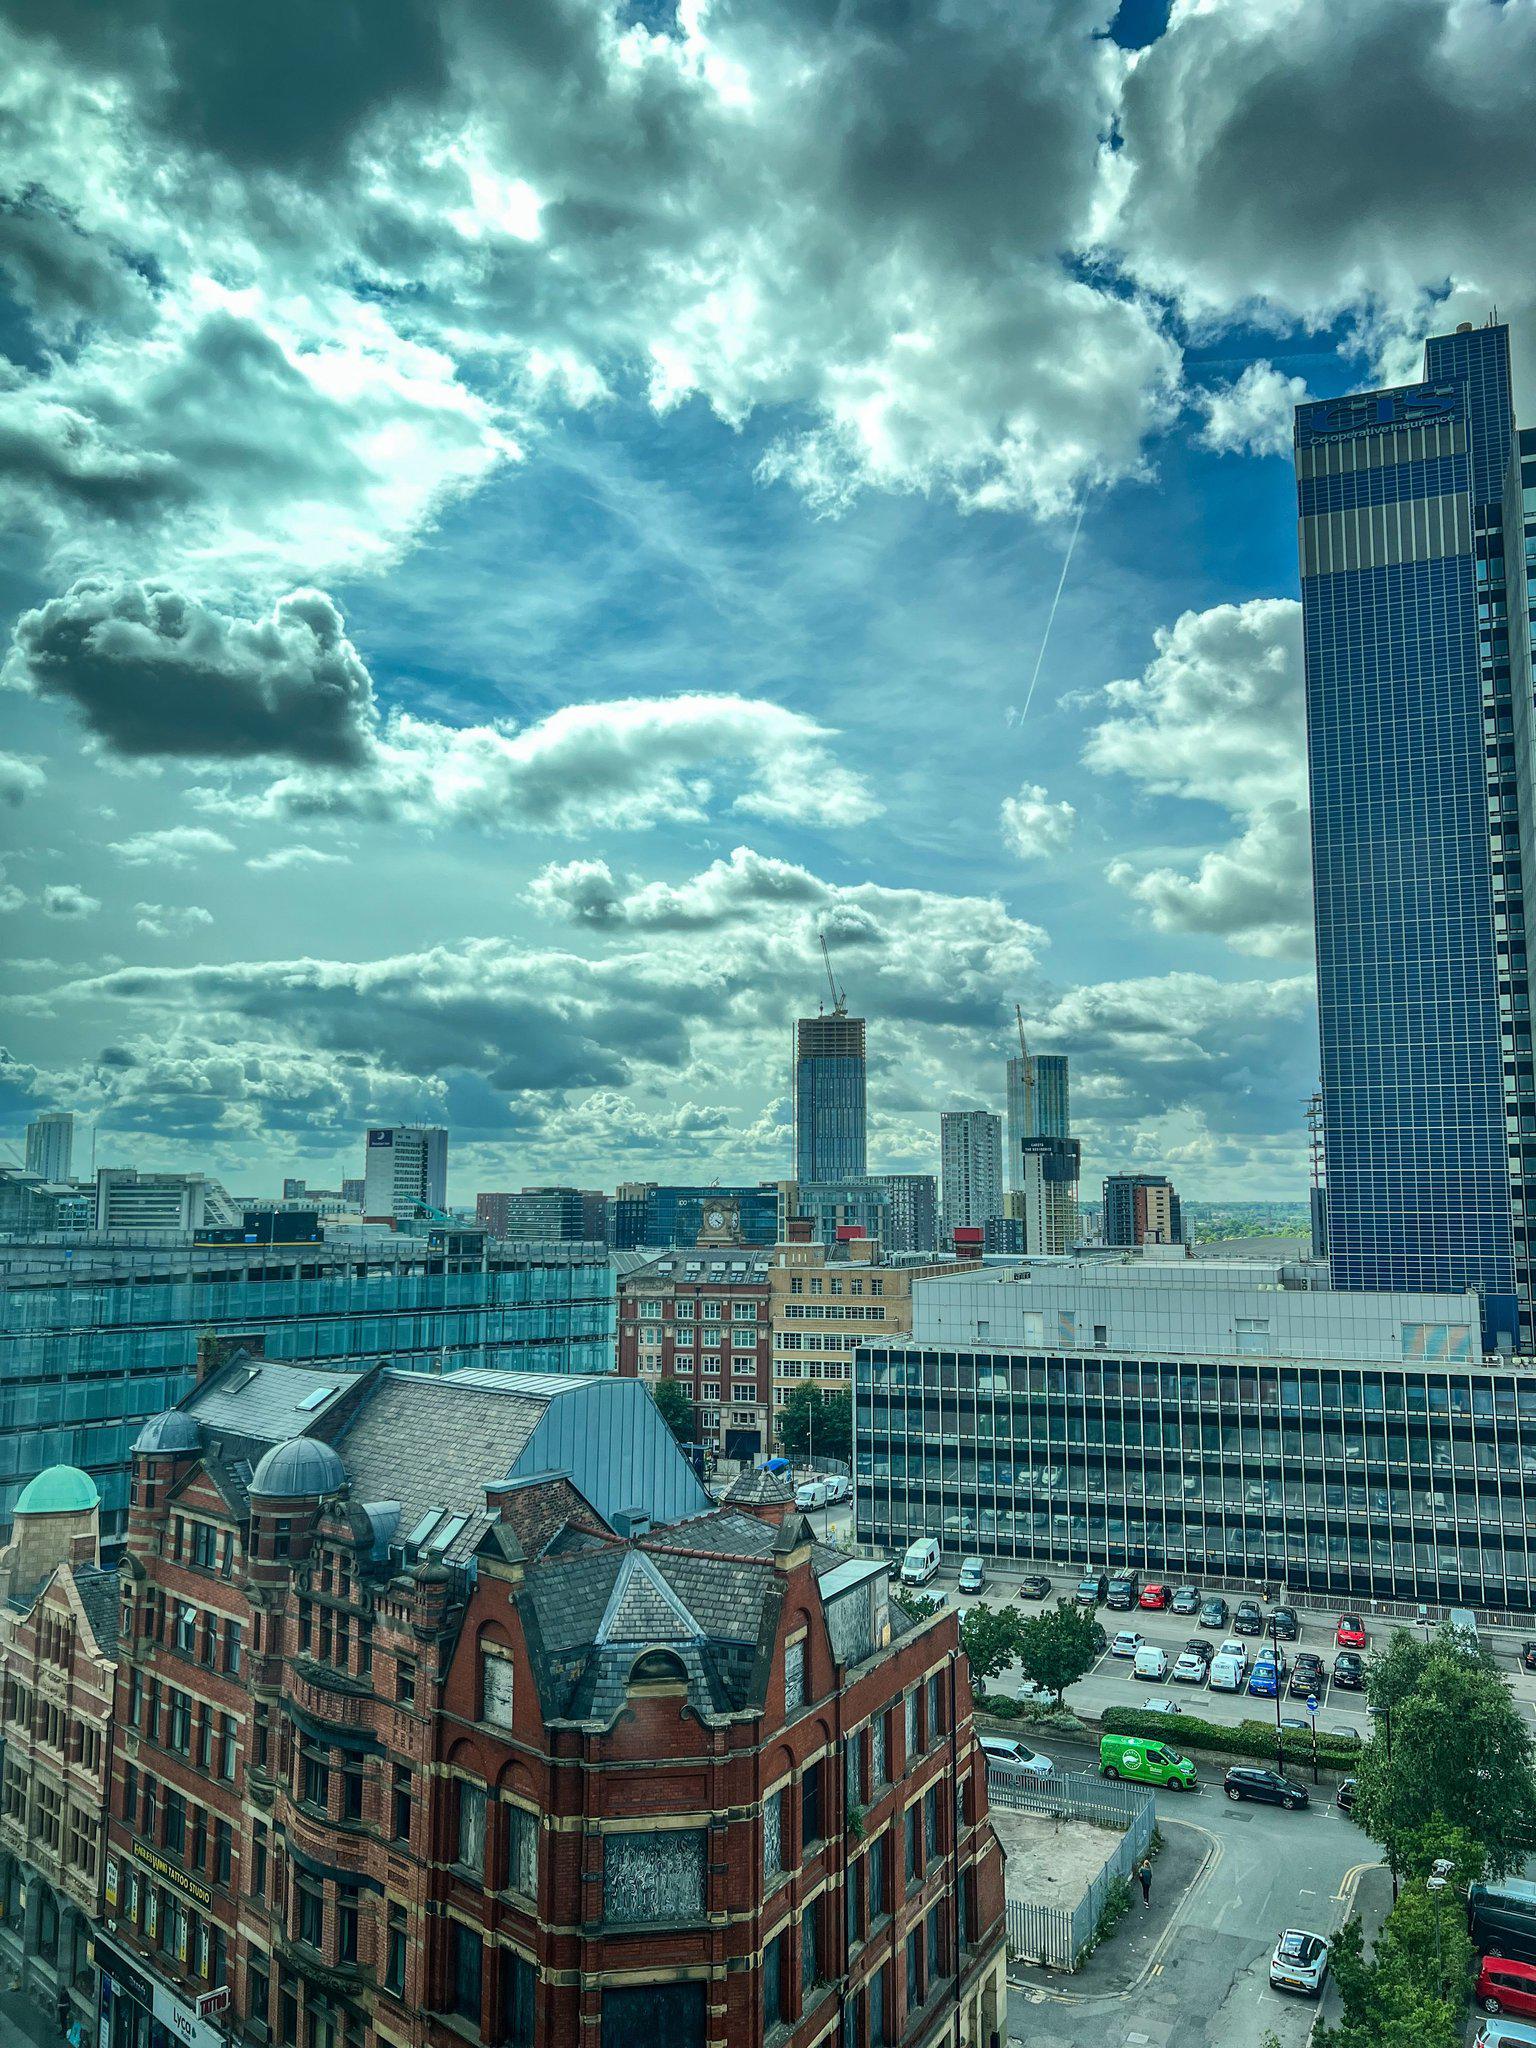 Images Crowne Plaza Manchester City Centre, an IHG Hotel